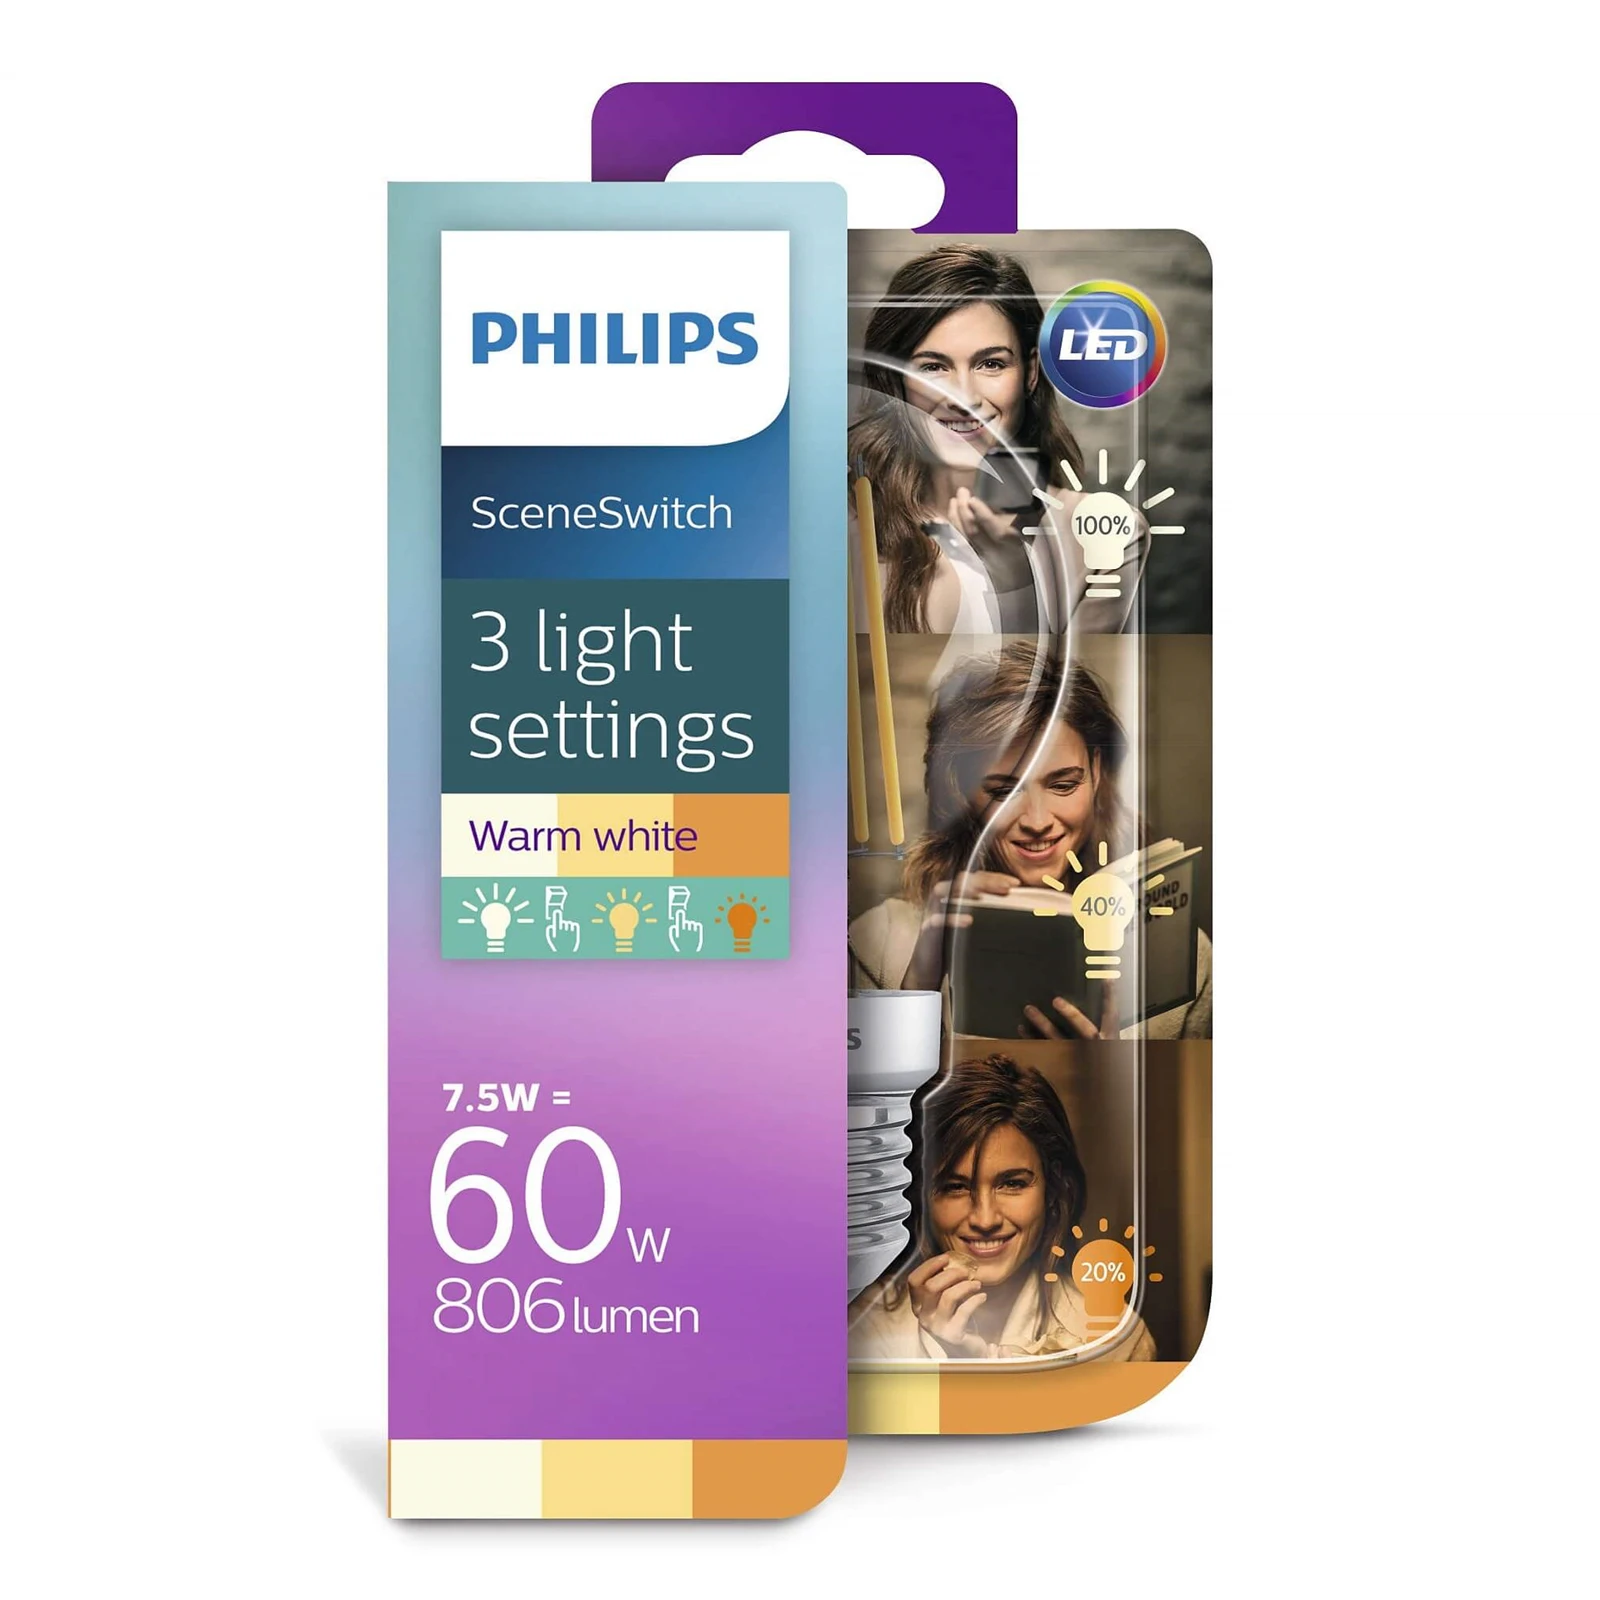 Bulb LED 2-5-8W Sceneswitch (80/320/806lm) Filament E27 Philips - Buy online